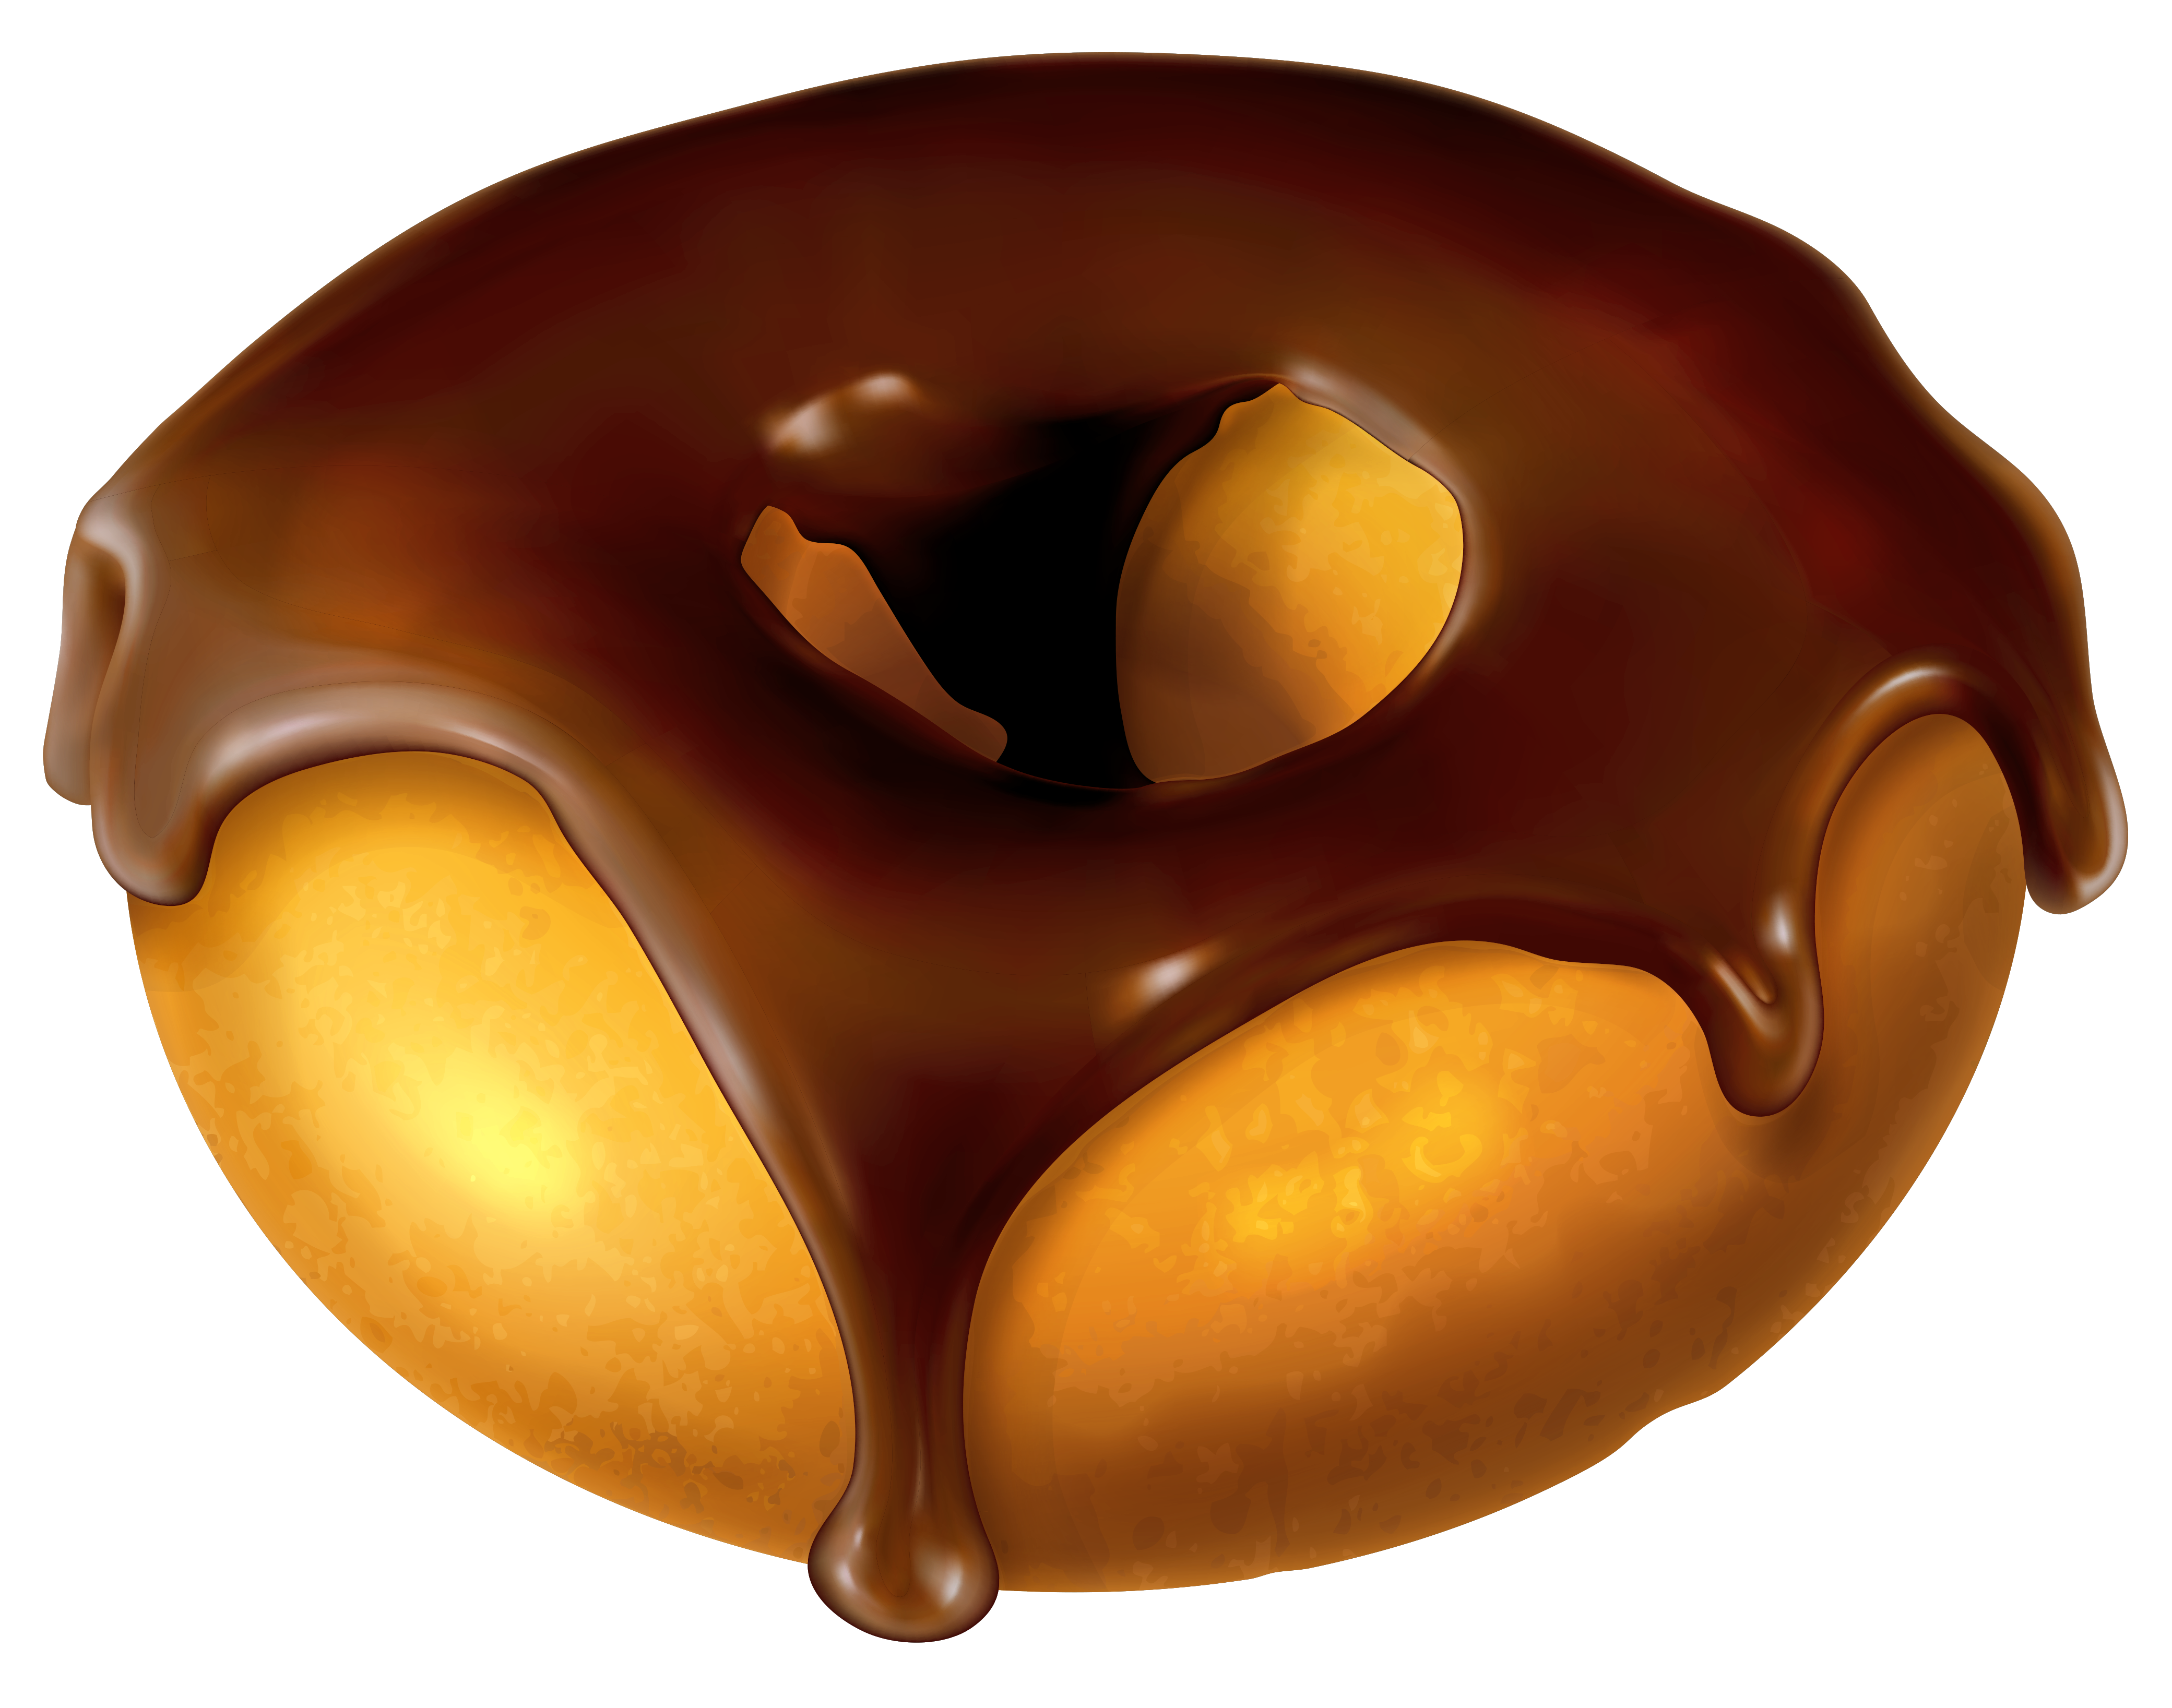 Donut with chocolate png. Doughnut clipart sugary food